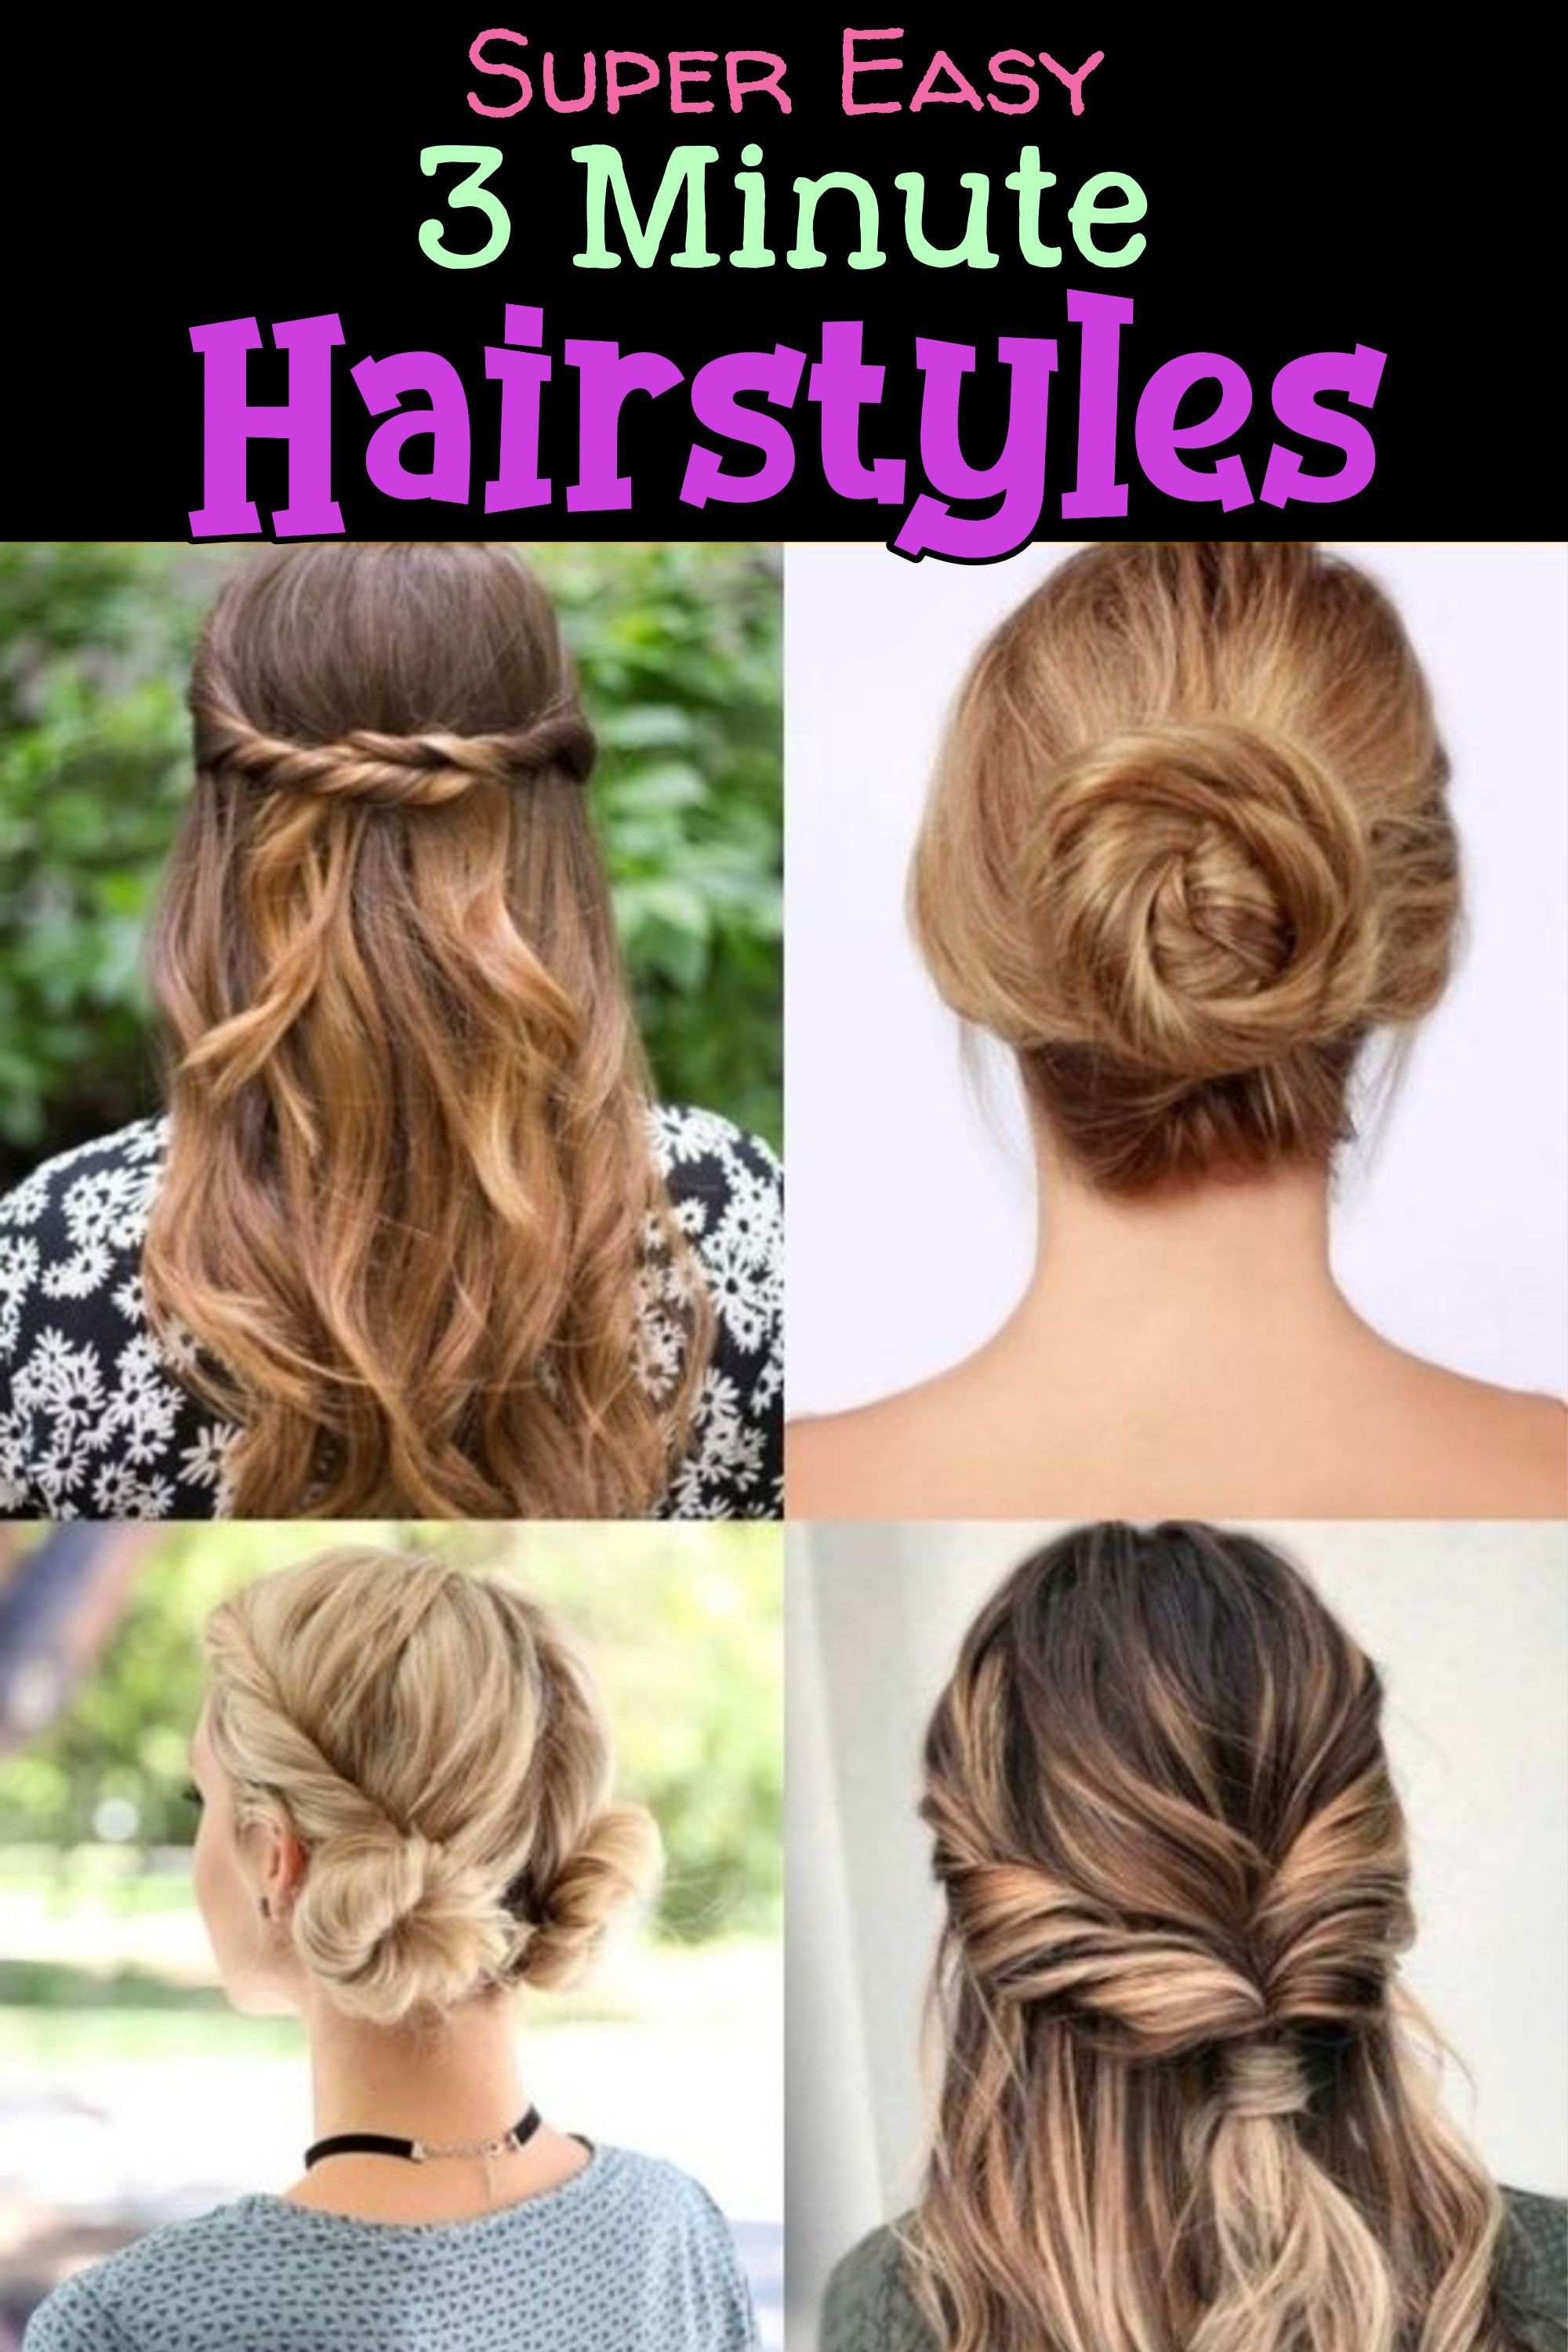 10 EASY Lazy Girl Hairstyle Ideas {Step By Step Video Tutorials For Lazy Day Running Late Quick Hairstyles} - Clever DIY Ideas -   15 hair for girls ideas